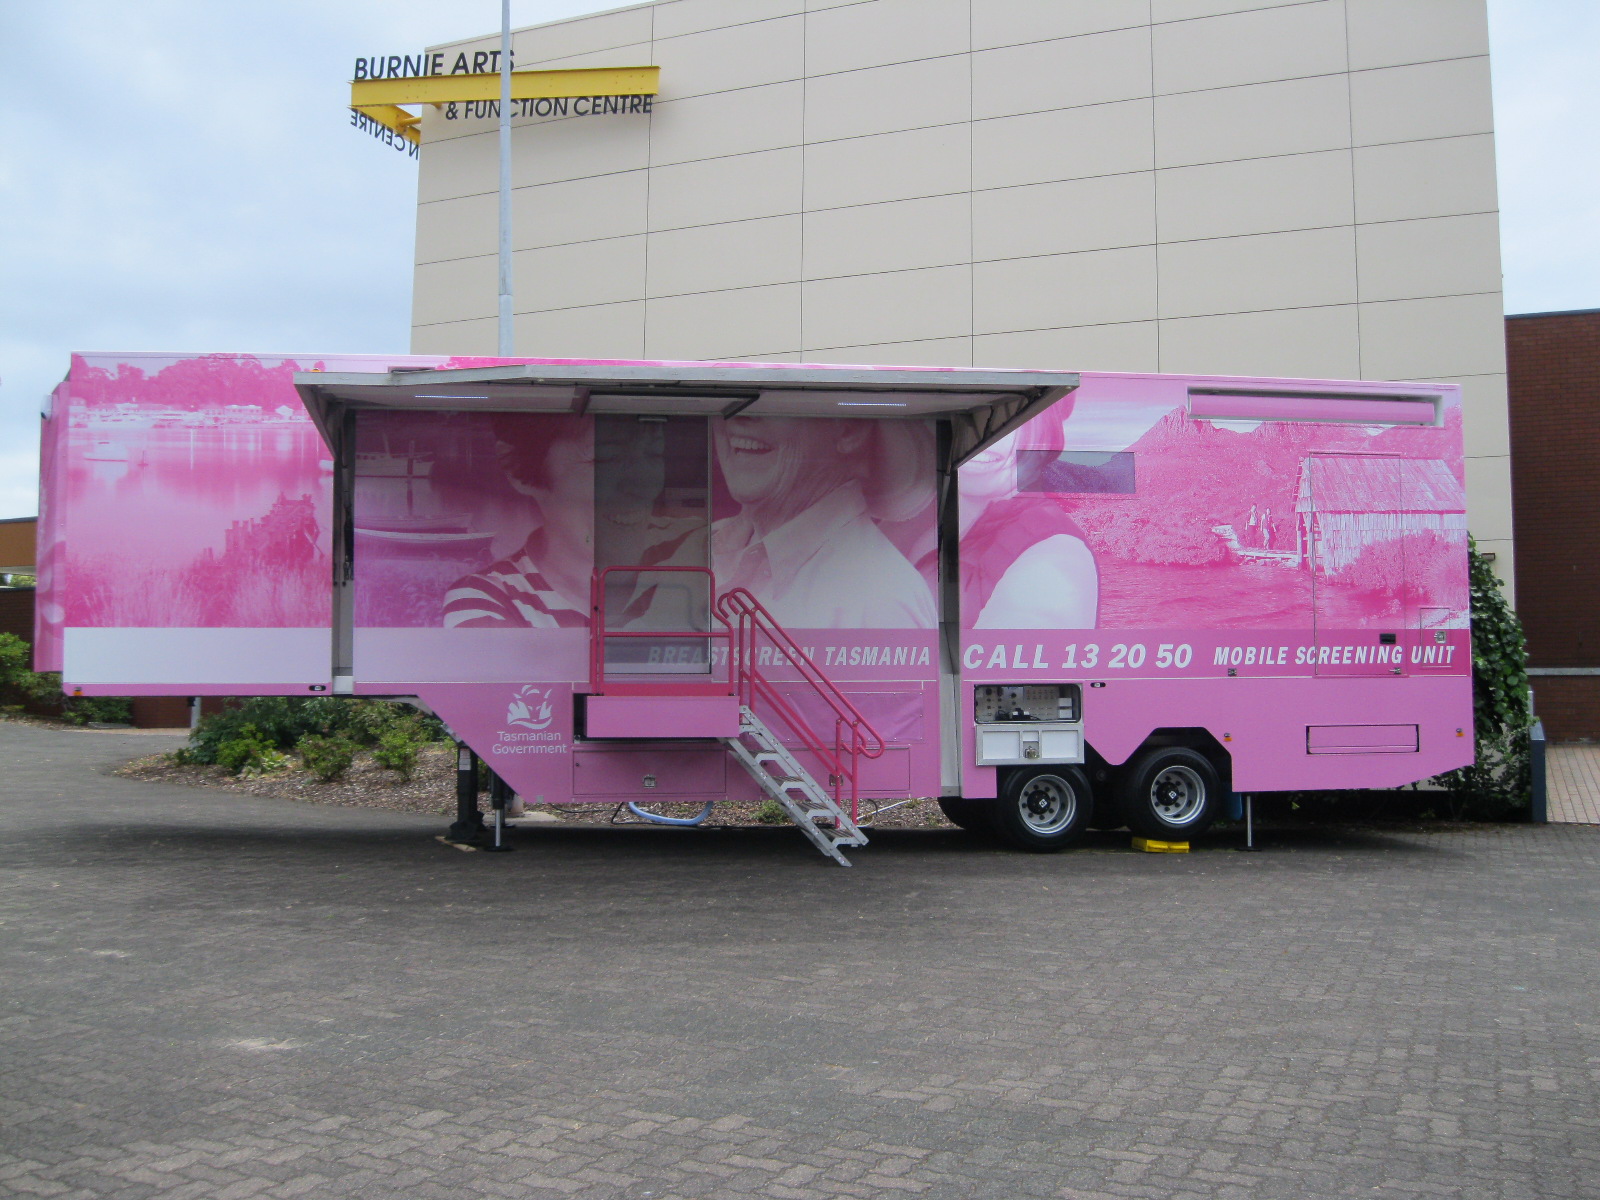 A photo of the pink mobile unit on location for BreastScreen Tasmania.